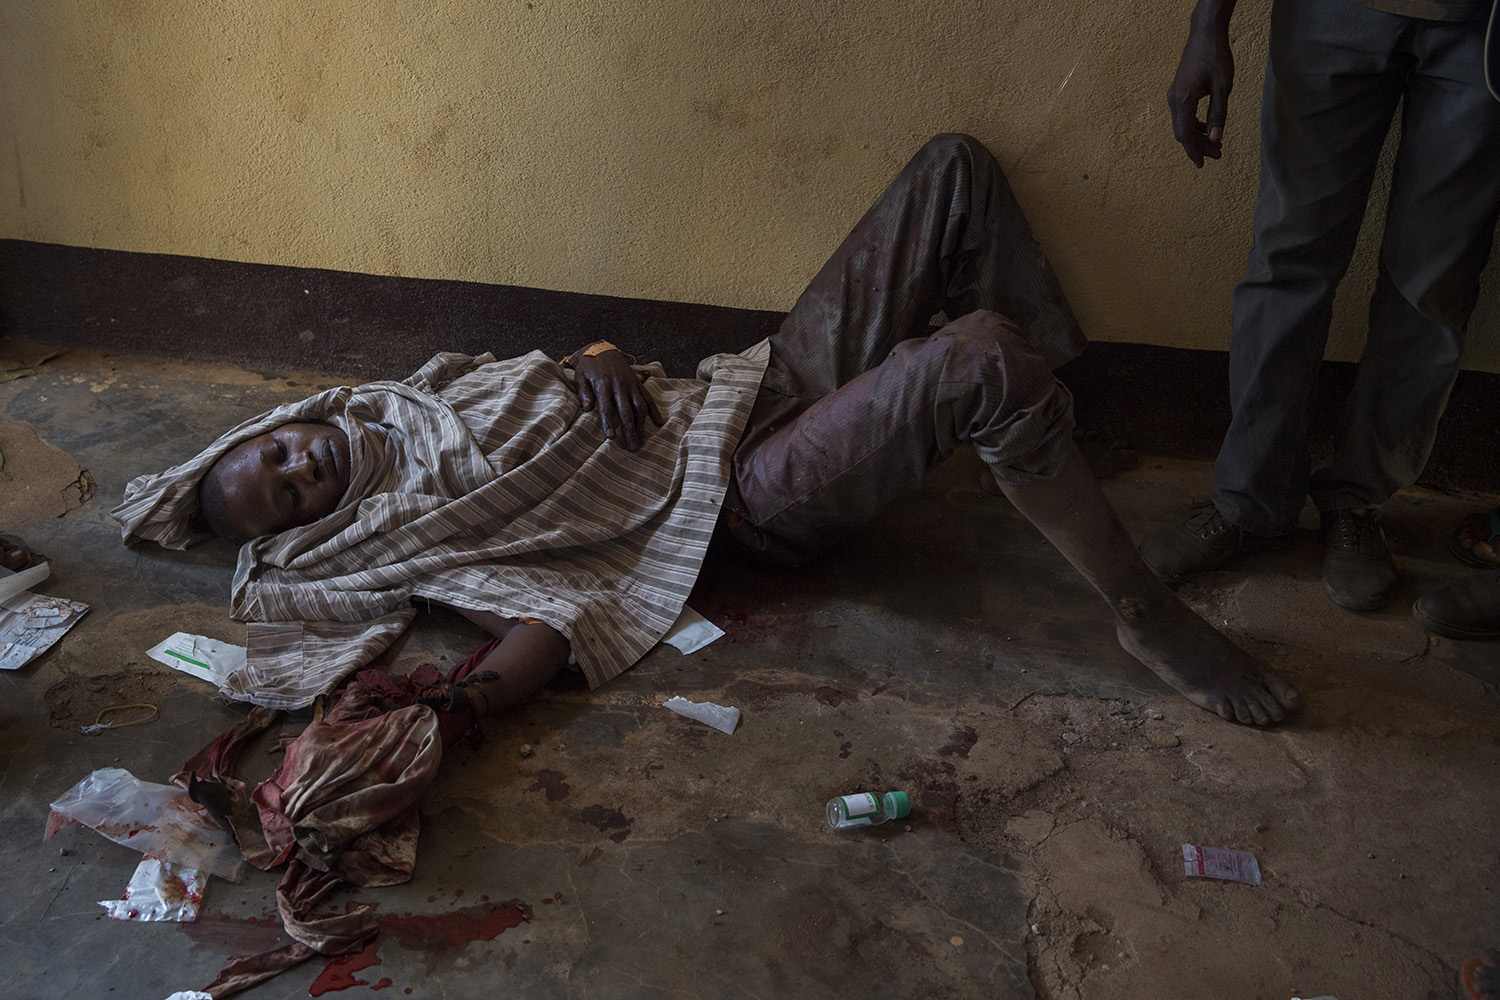 A mulsim man wounded by machete blows is treated in a Ali Babolo mosque in the muslim district of 5Kilo, 58 bodies, including 4 women, were also brought there following several battles launched on early morning by antibalakas. Most of the dead were killed by machete blows.